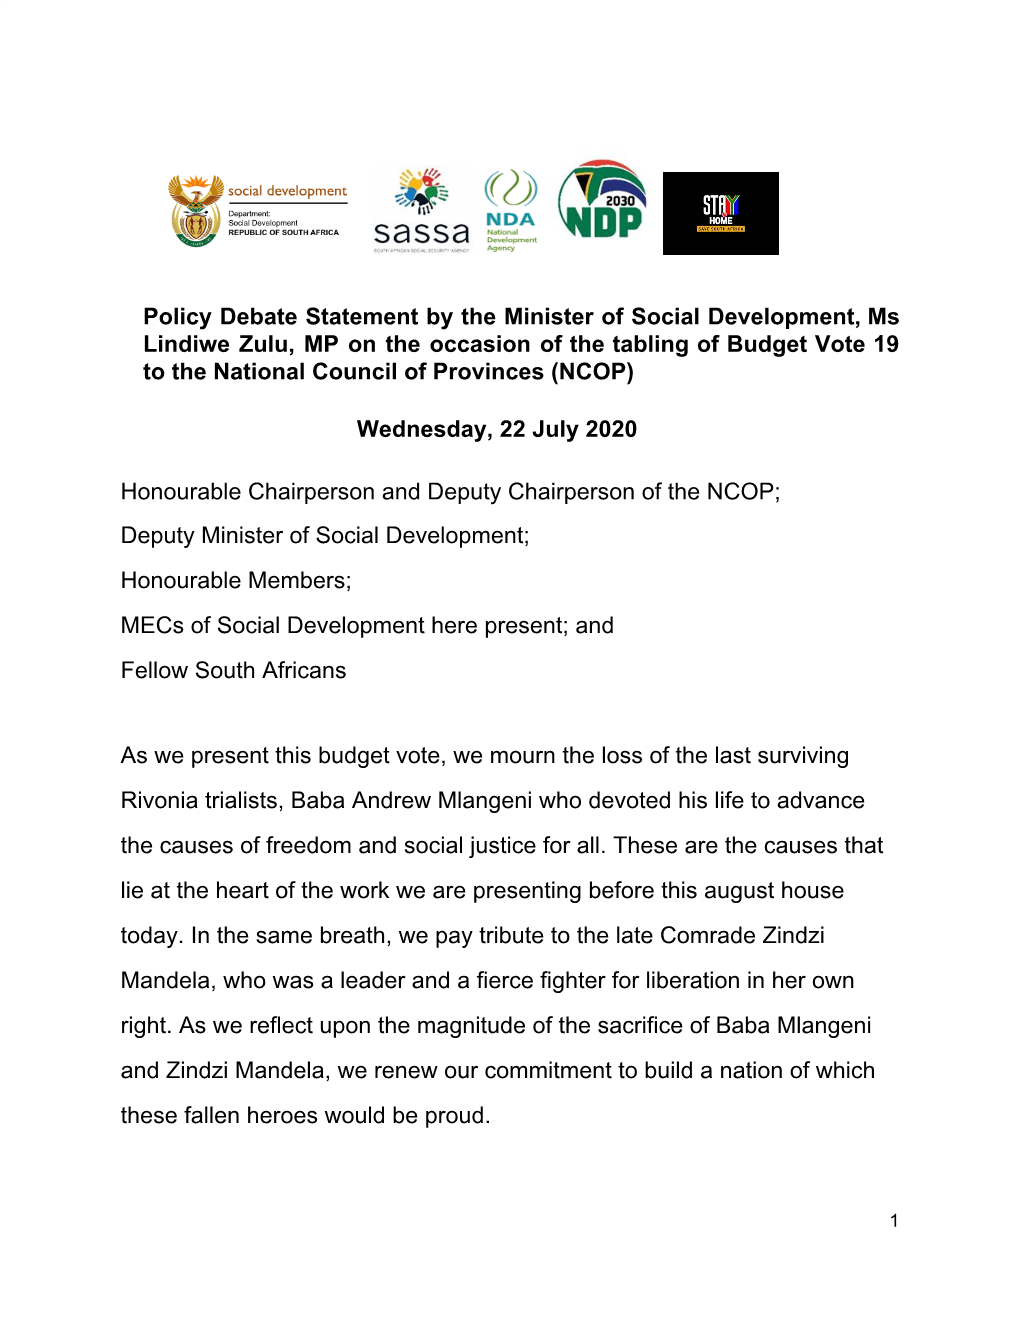 Policy Debate Statement by the Minister of Social Development, Ms Lindiwe Zulu, MP on the Occasion of the Tabling of Budget Vote